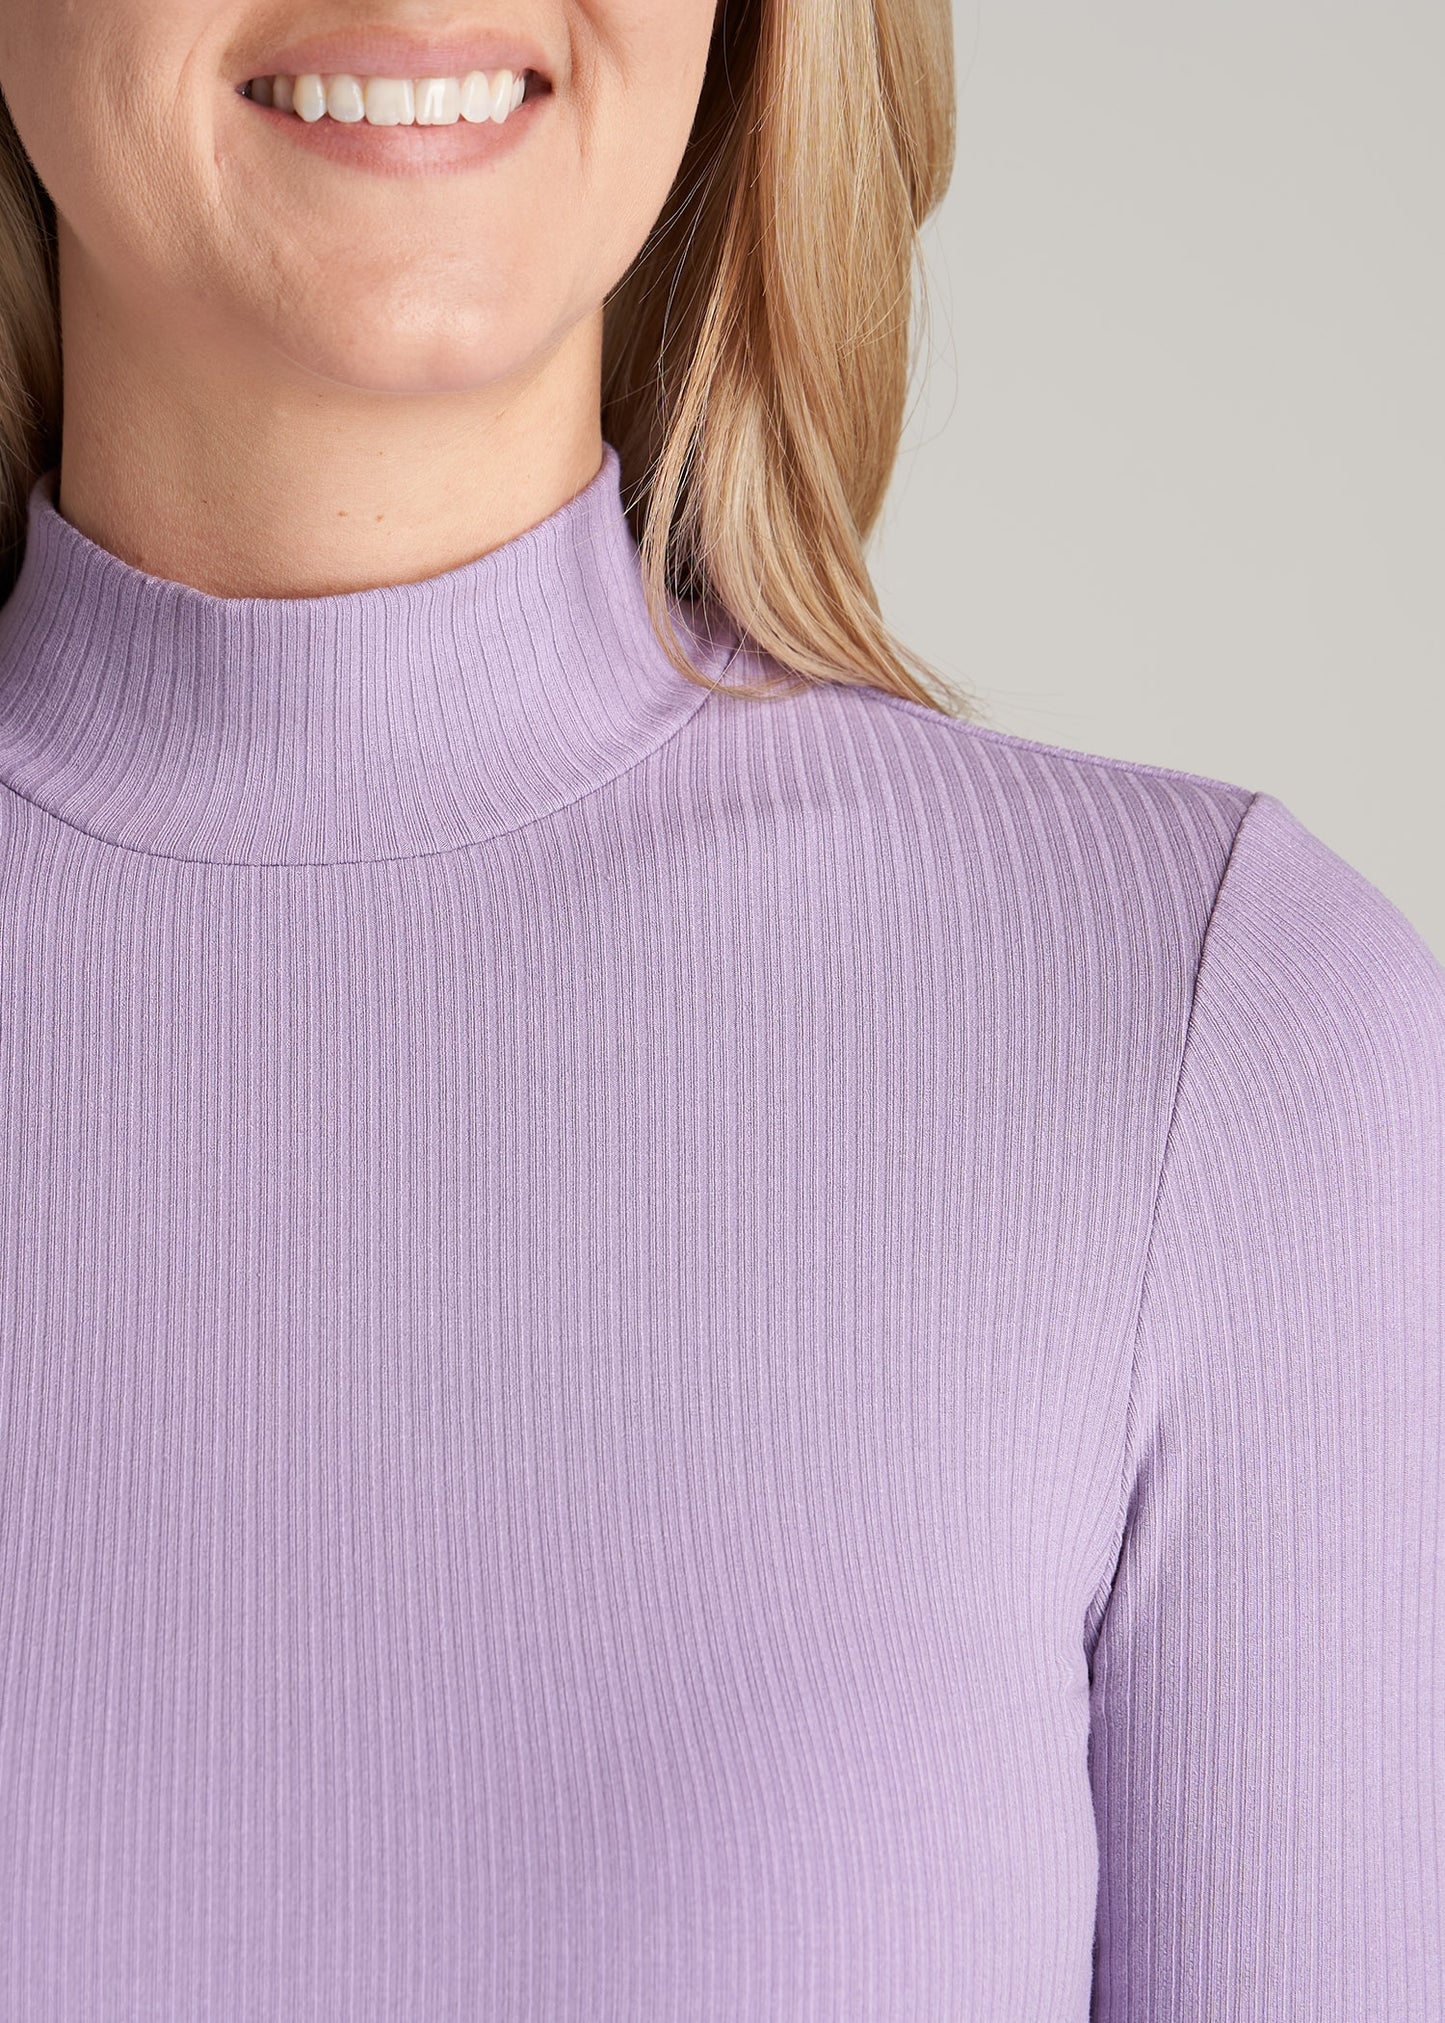 Long Sleeve Mock Neck Ribbed Top for Tall Women in Lavender Frost